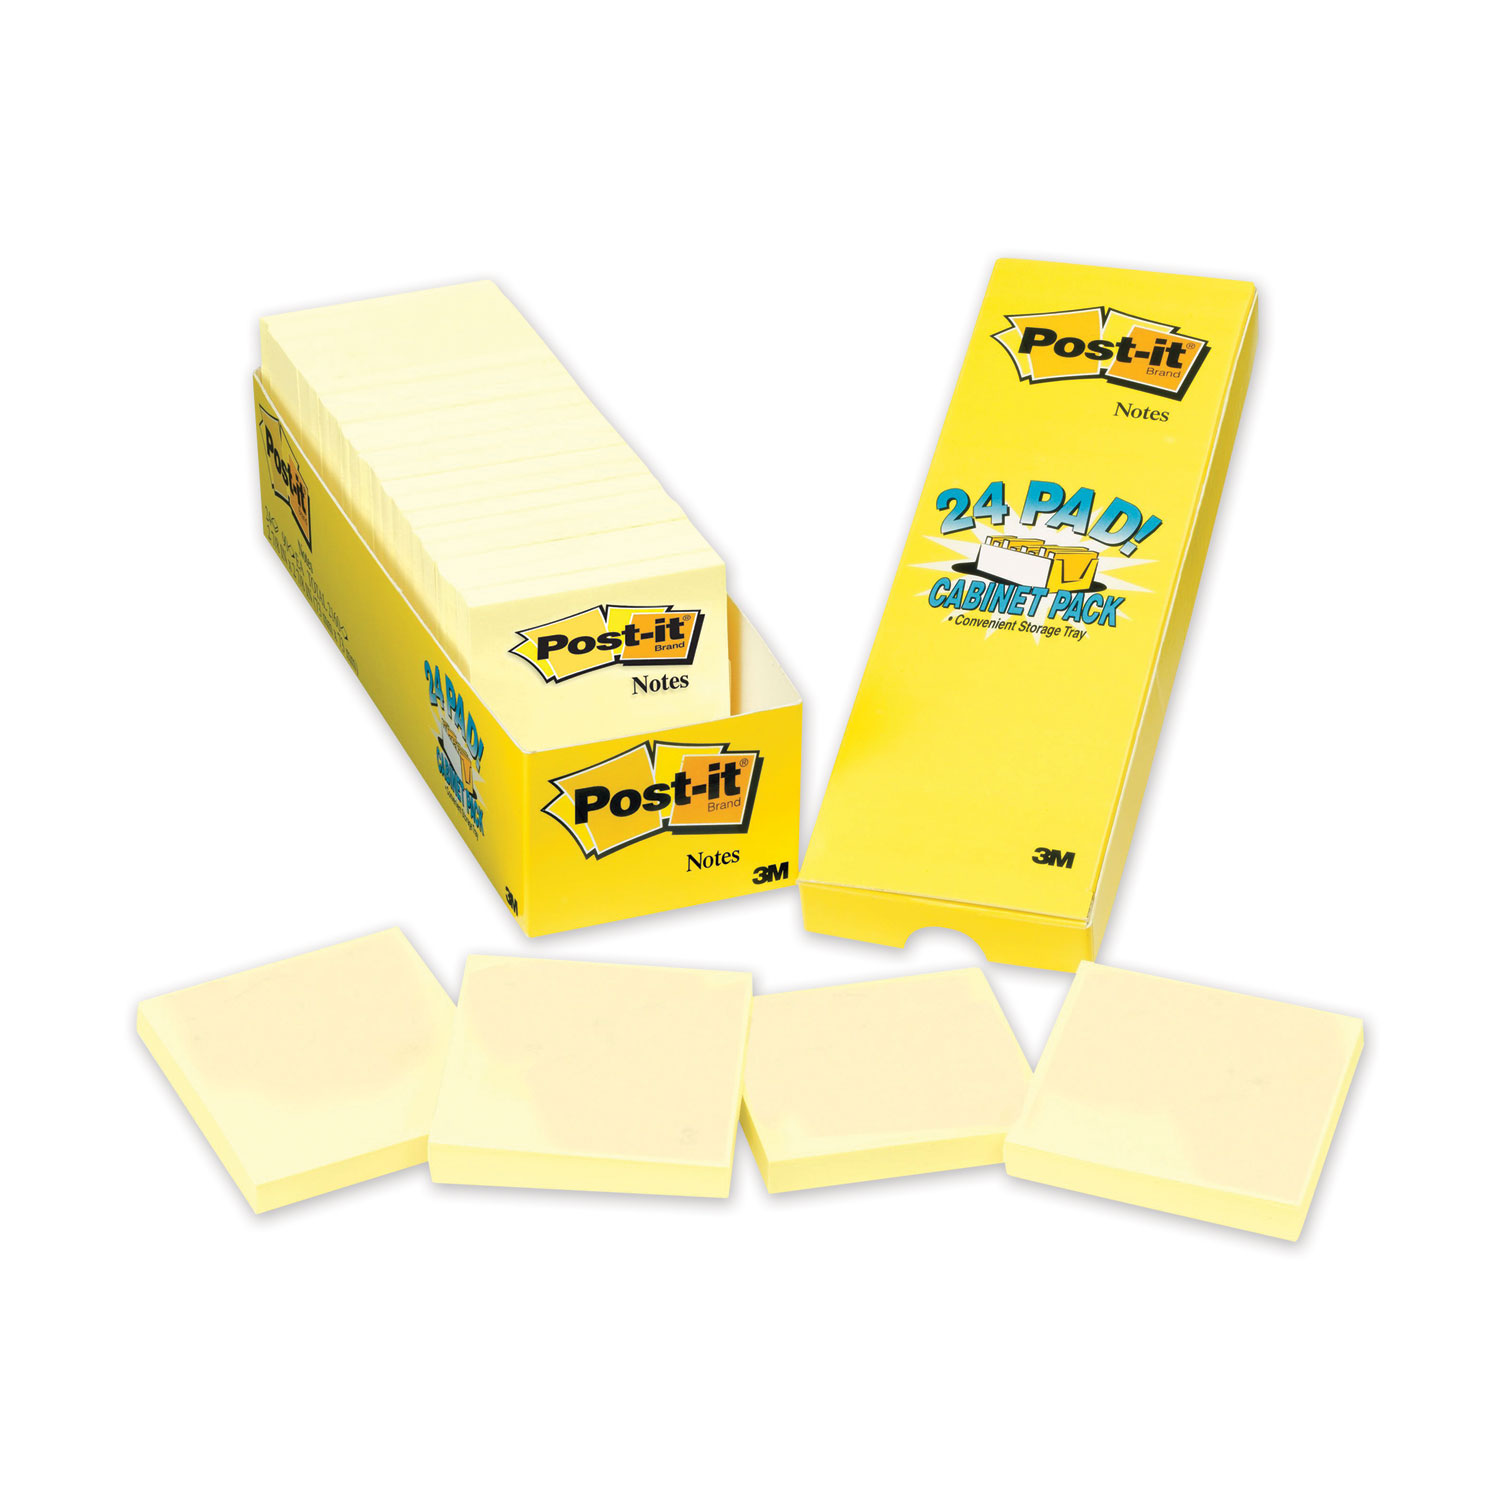  Post-it Notes 65424CP Original Pads in Canary Yellow, Cabinet Pack, 3 x 3, 90 Sheets/Pad, 24 Pads/Pack (MMM70005141687) 